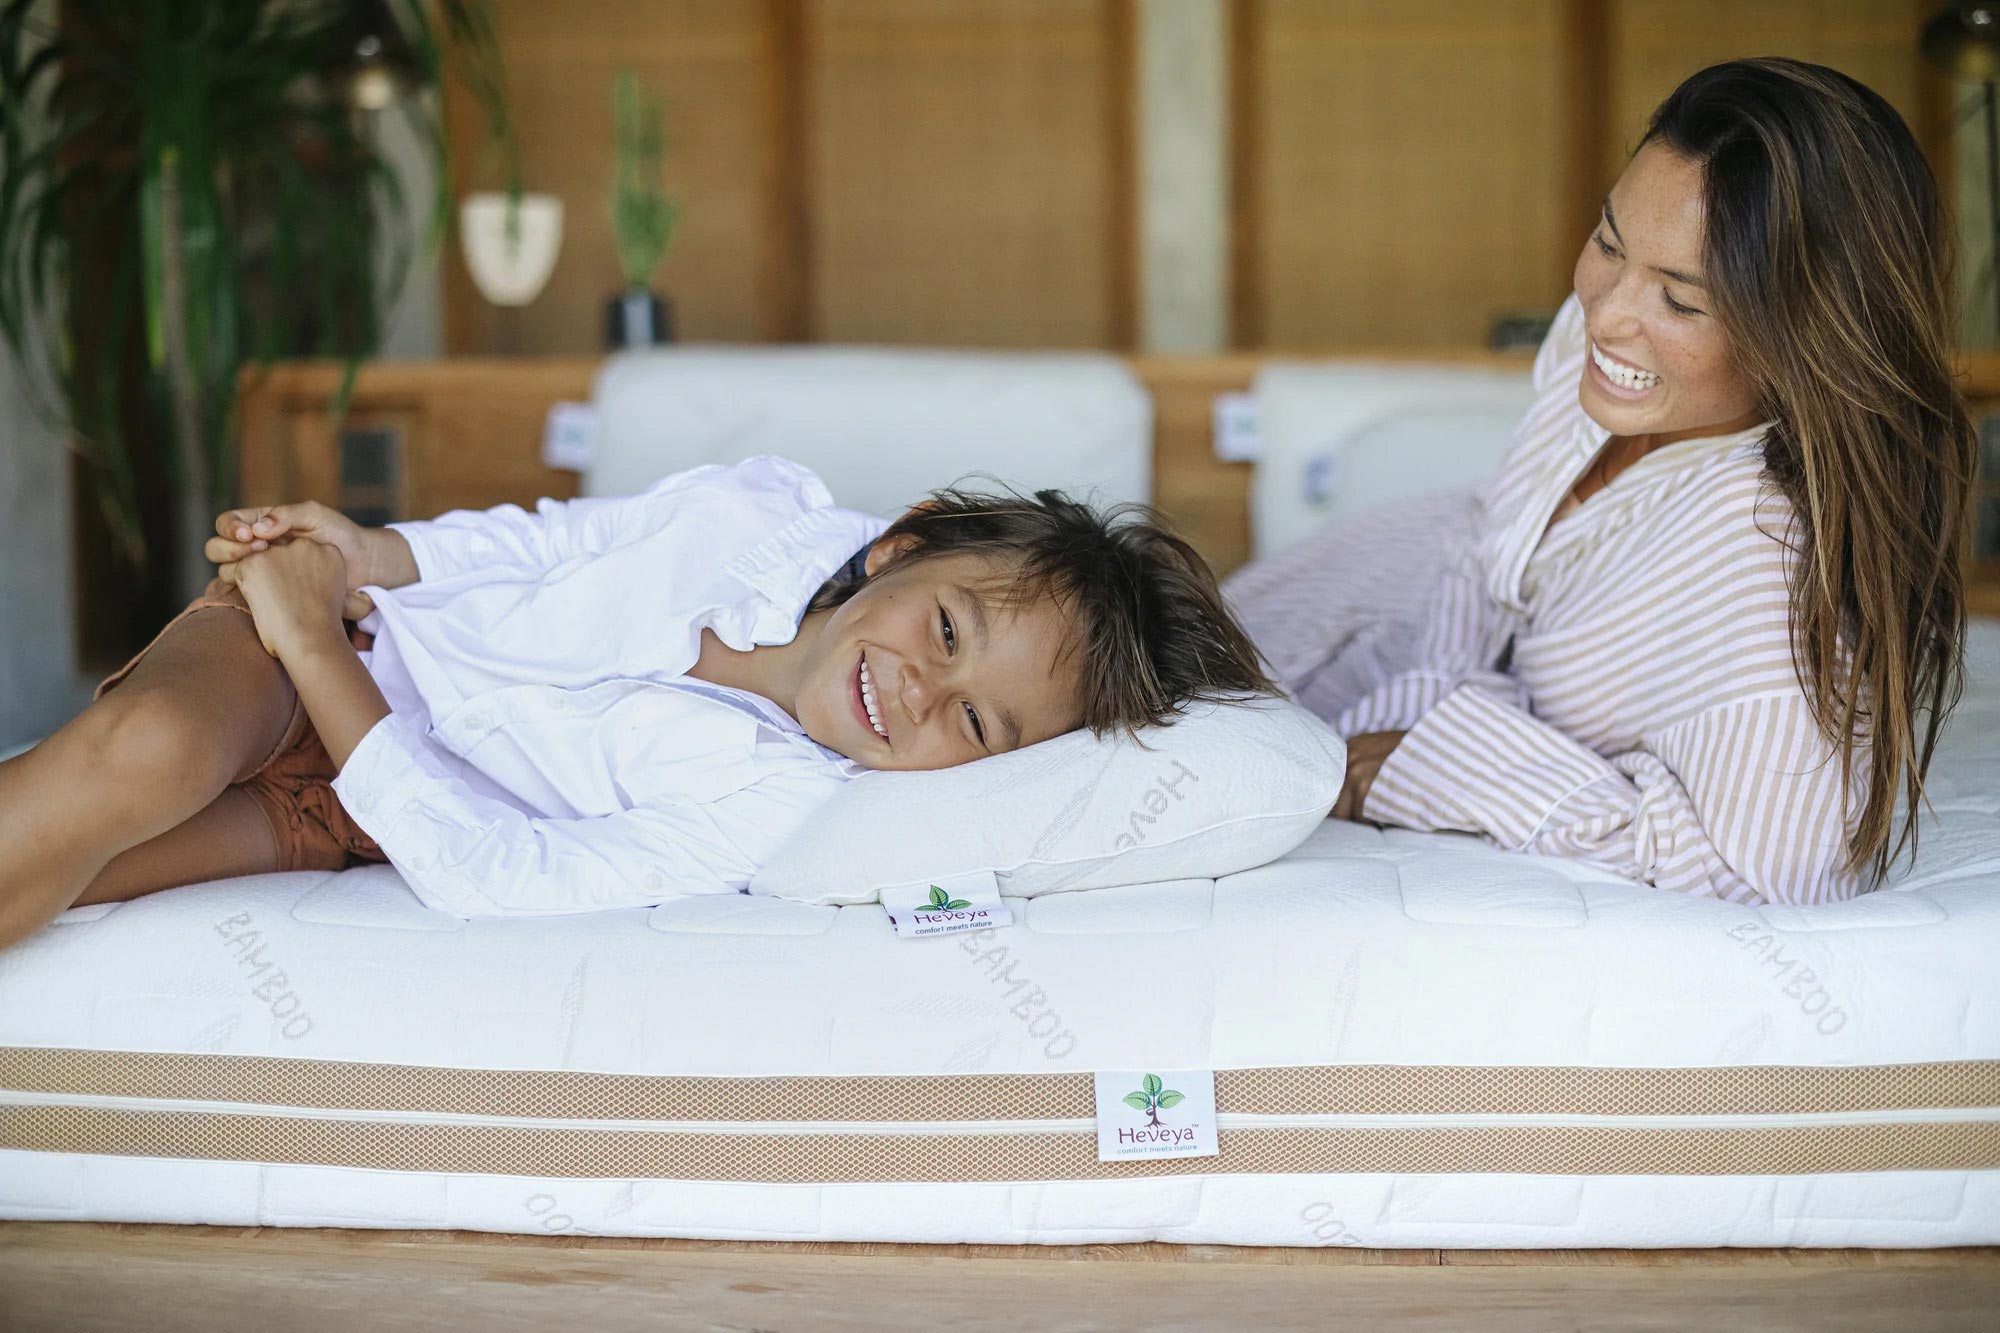 A Top Quality Mattress Can Improve The Quality Of Your Life